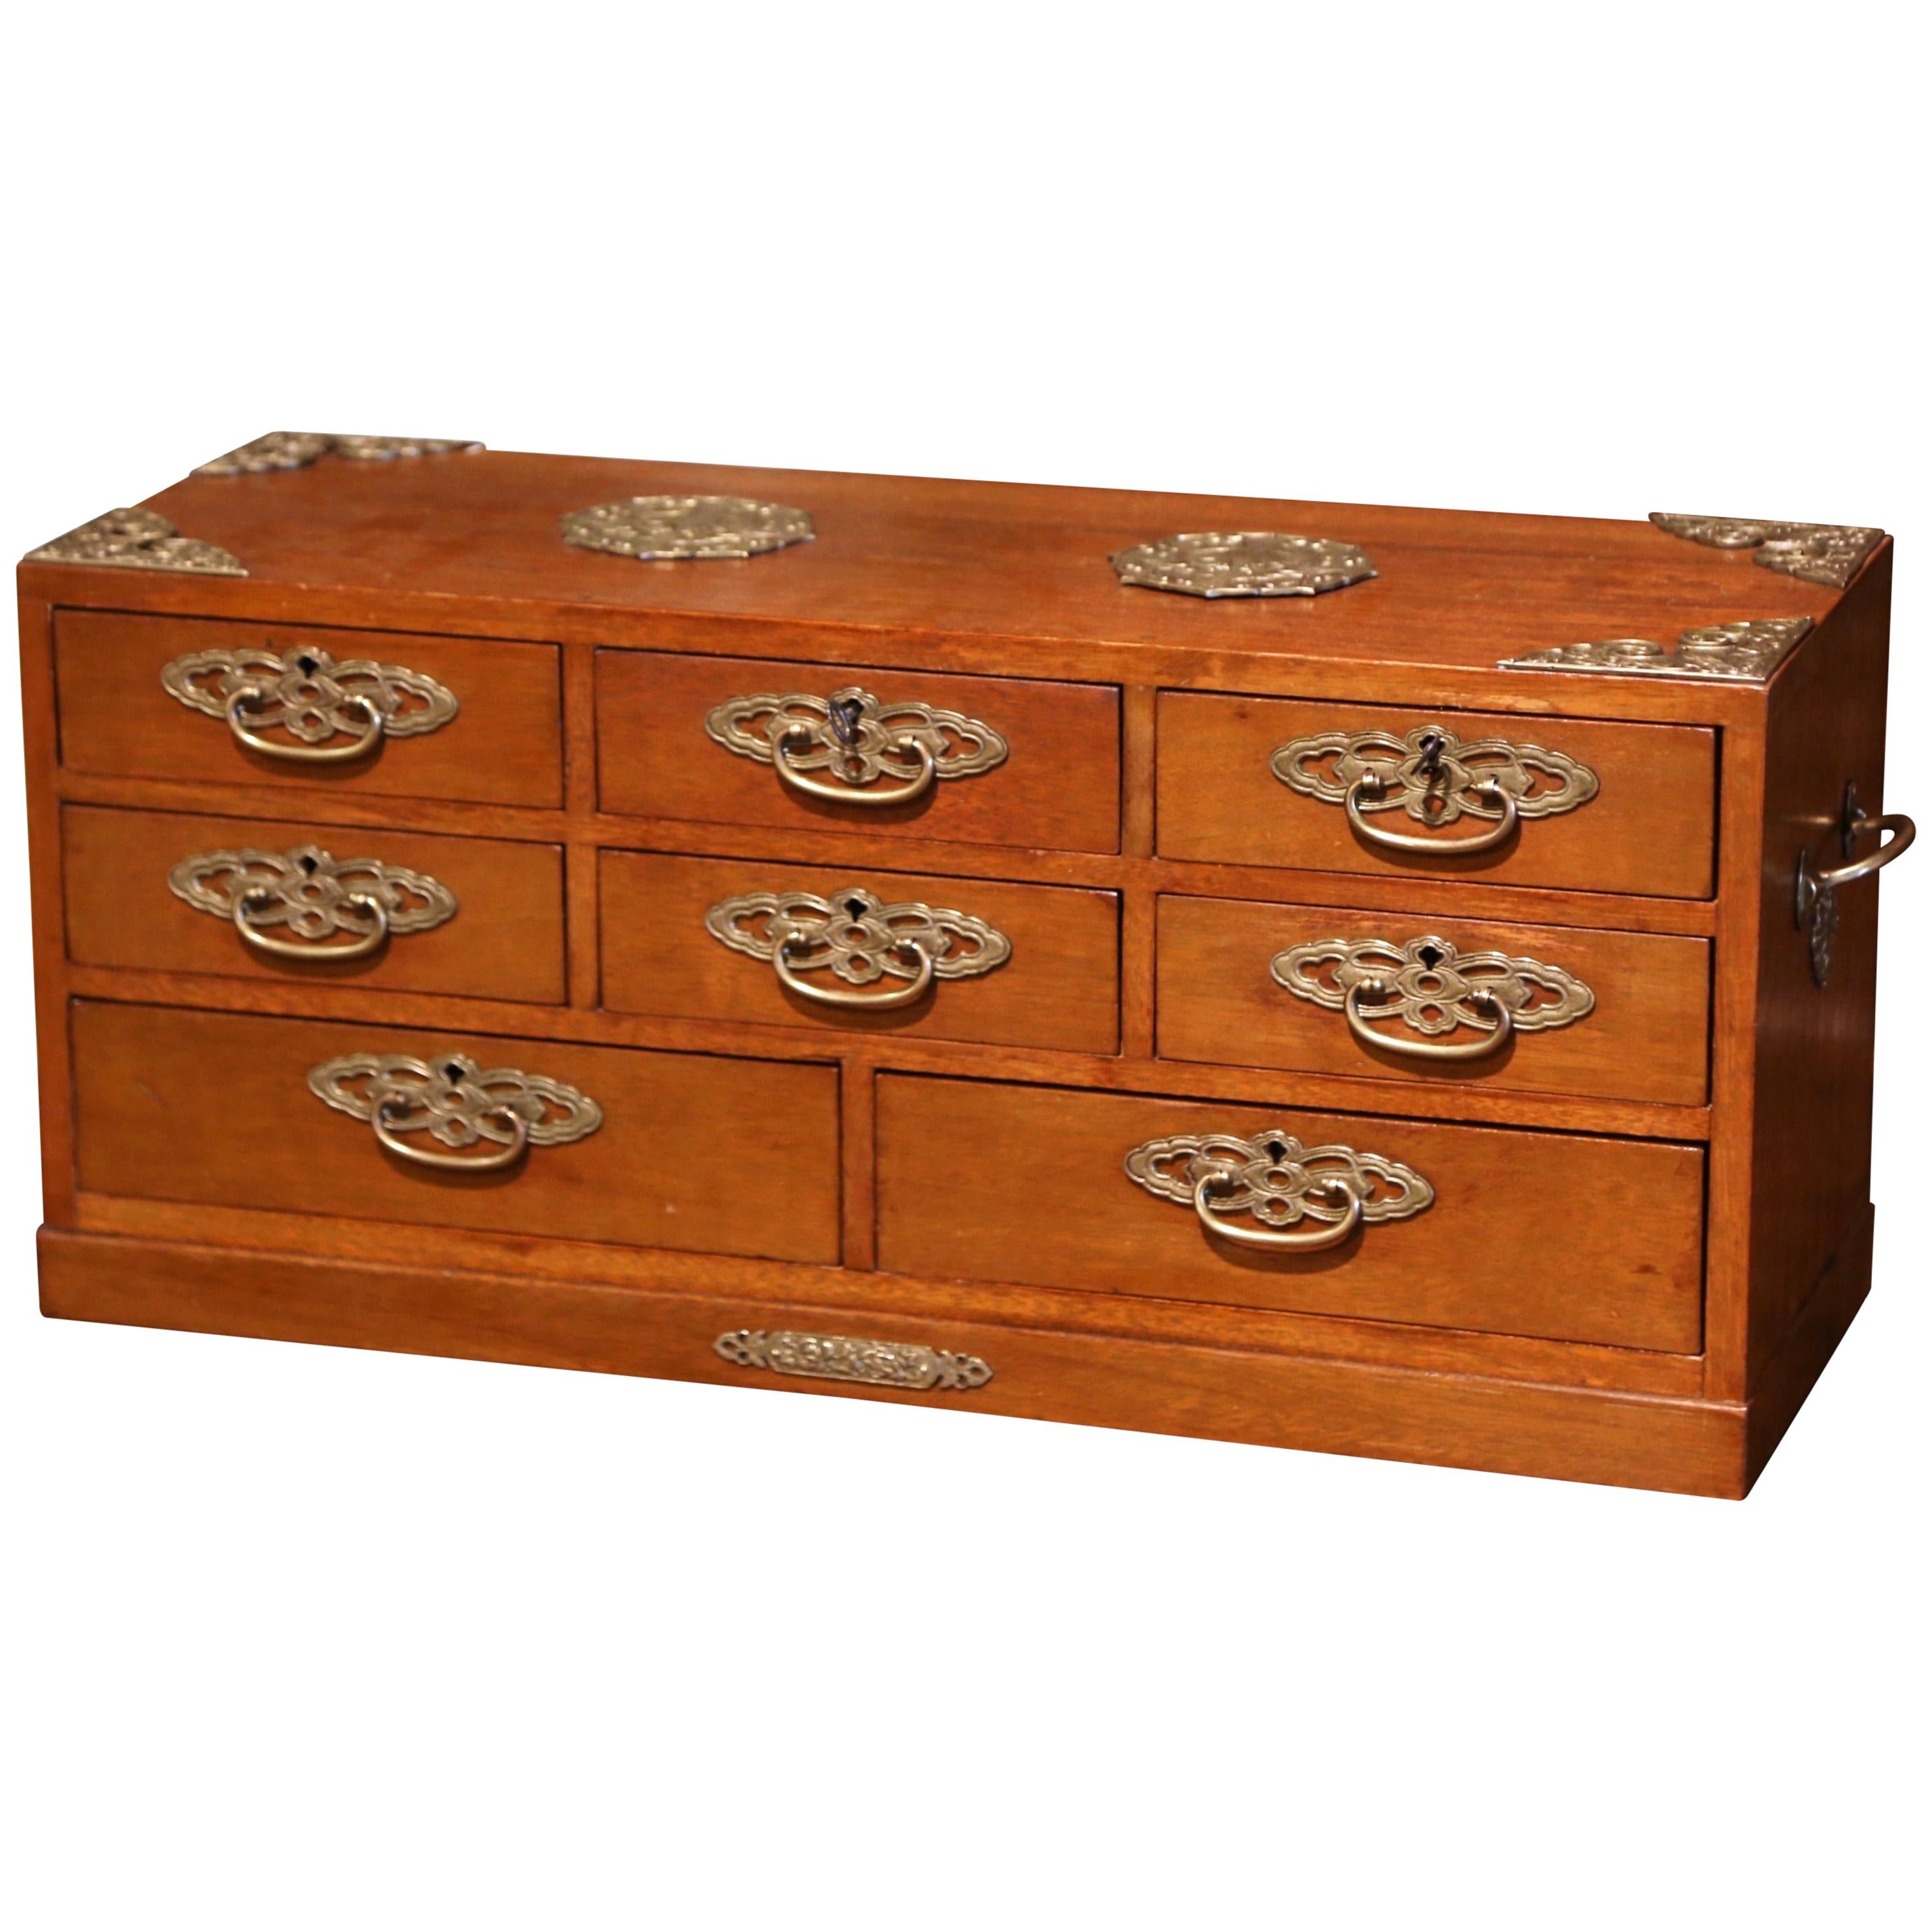 Mid-20th Century English Carved Mahogany and Brass Eight-Drawer Jewelry Box